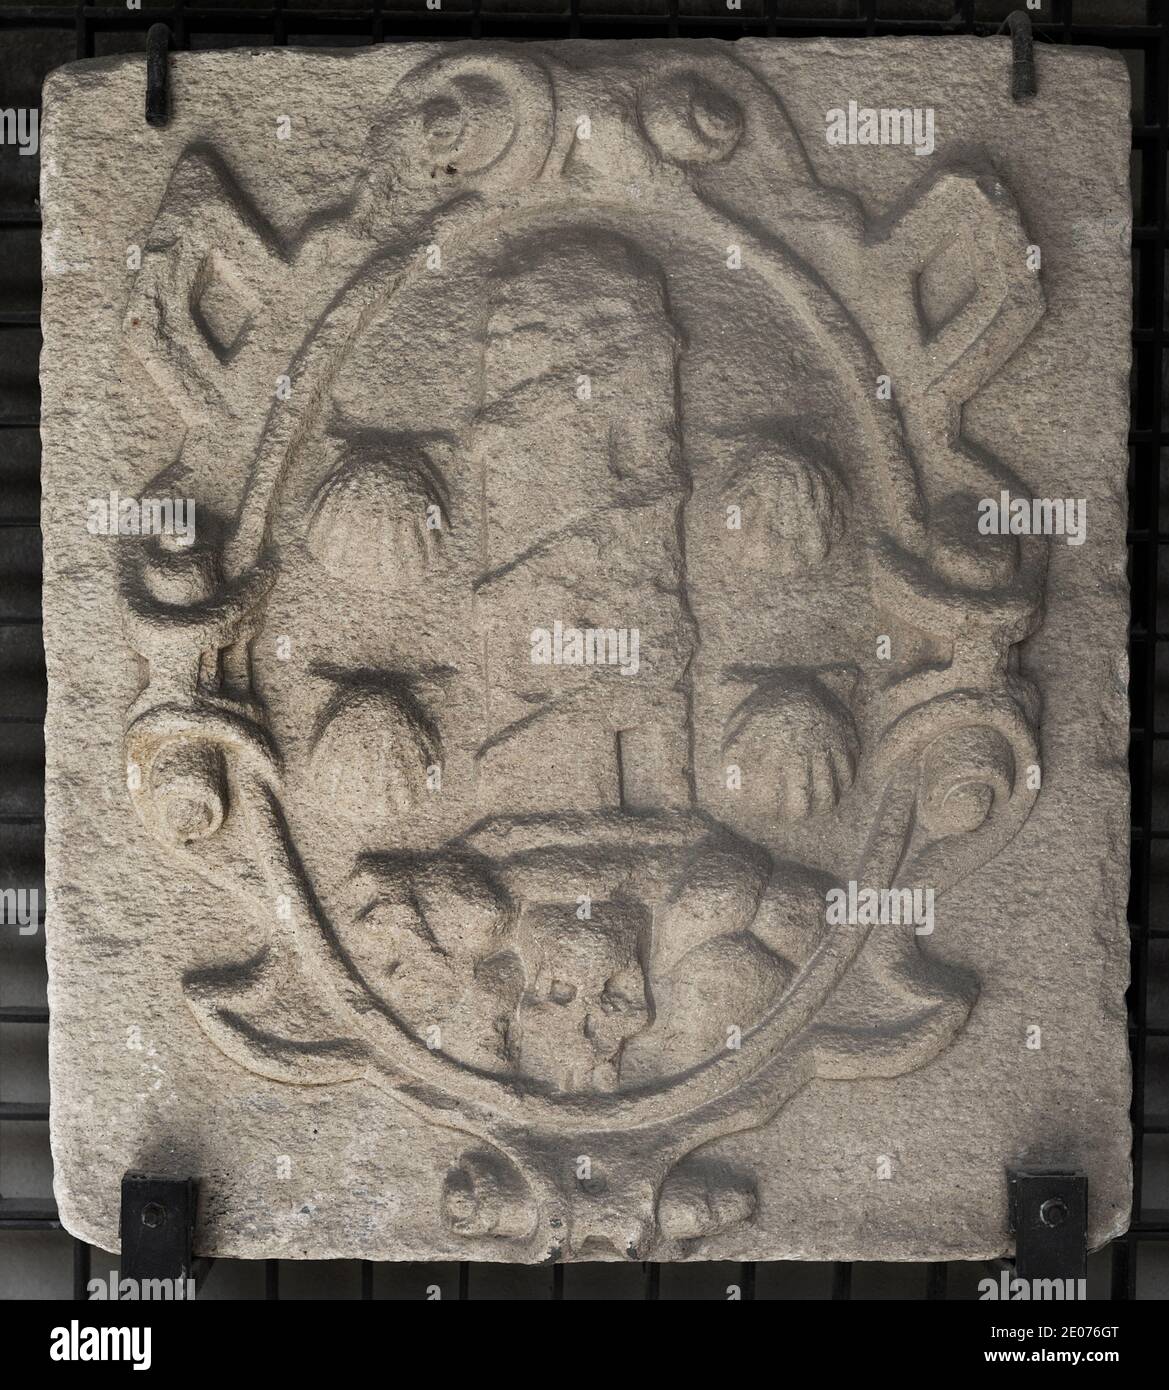 Coat of arms of La Coruña, 17th century. From Torre de Arriba Door (Walls of La Coruña, Galicia, Spain). It is depicted the tower of Roman origin, surrounded by a helicoidal ramp (prior to the restoration late 17th century which was made by the Duke of Uceda). The scallops make reference to the pilgrimage. Archaeological and History Museum (San Anton Castle). A Coruña, Galicia, Spain. Stock Photo